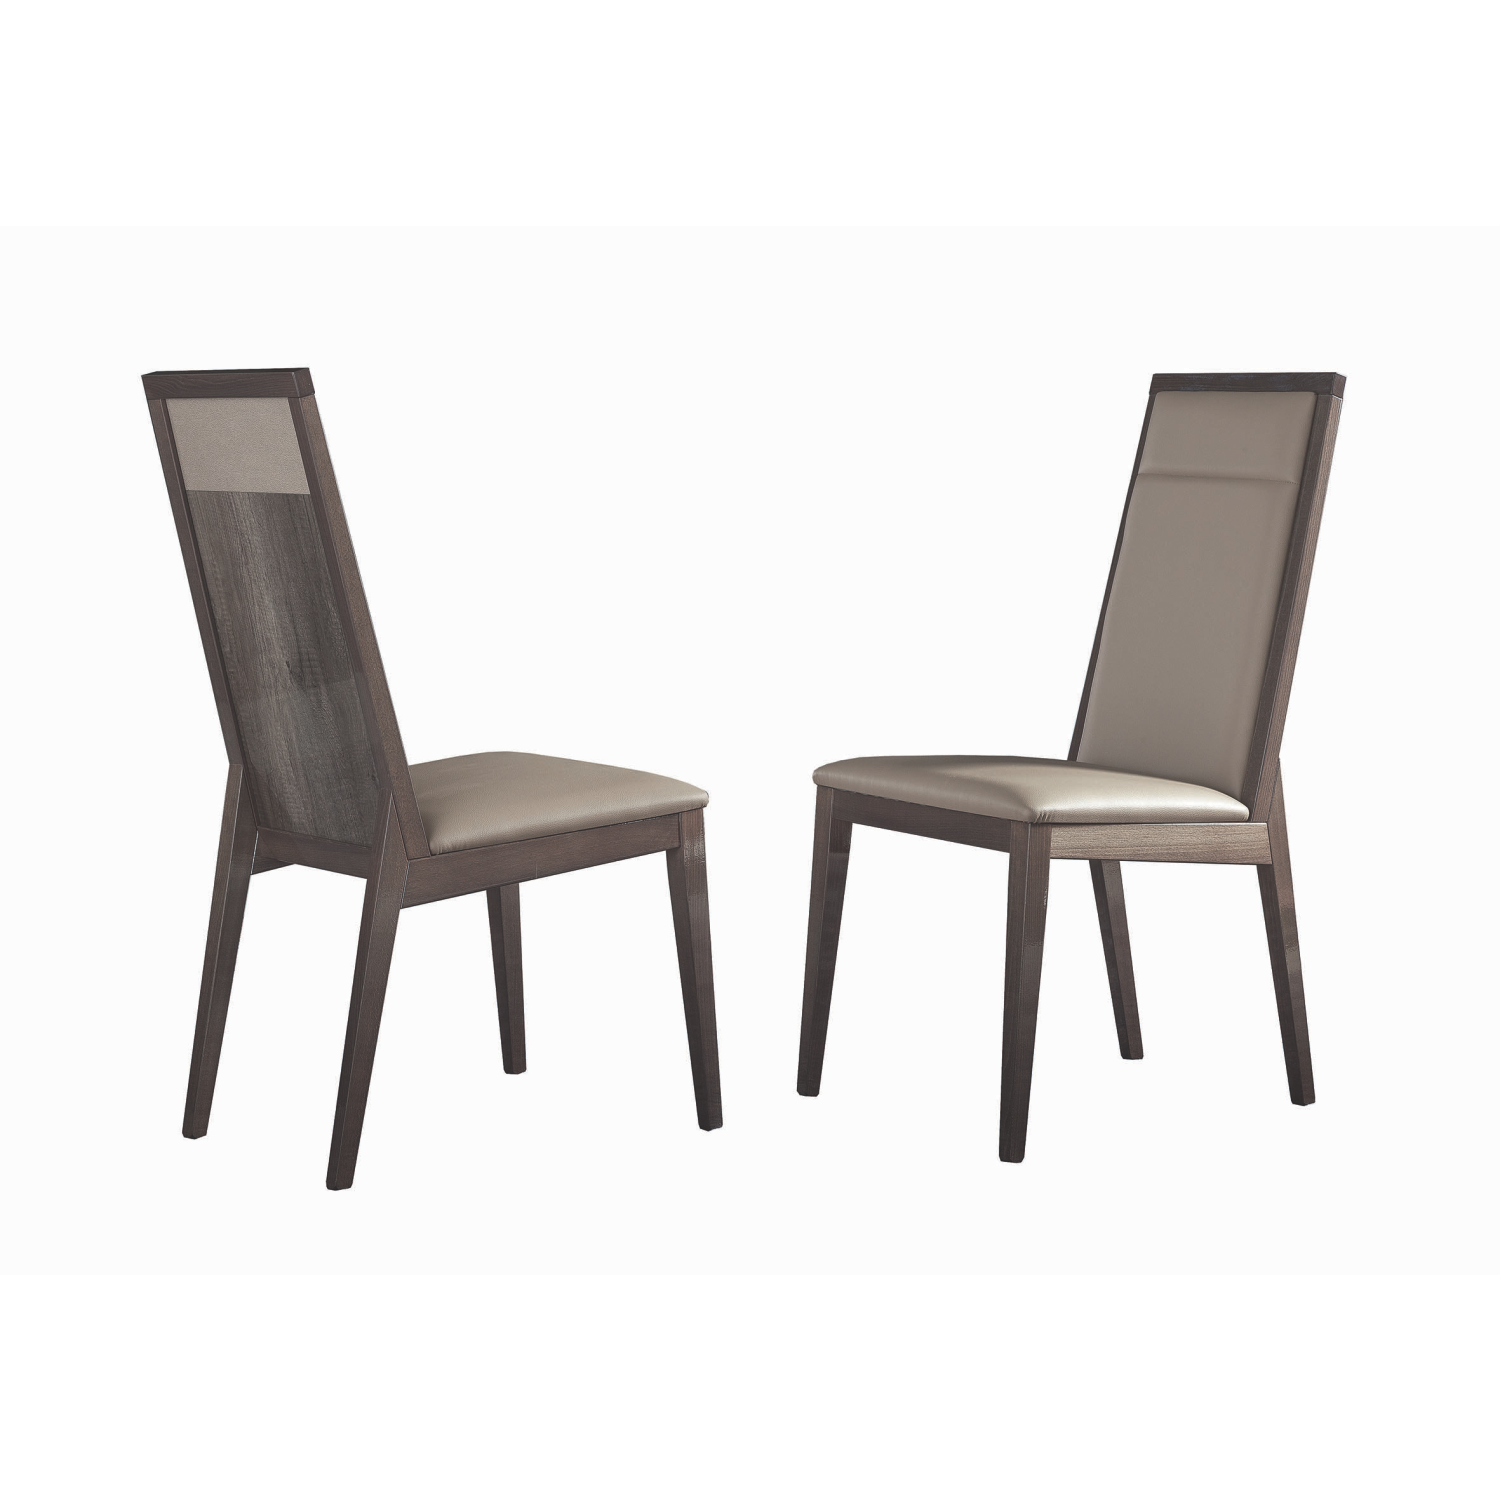 Matera Dining Chair Image